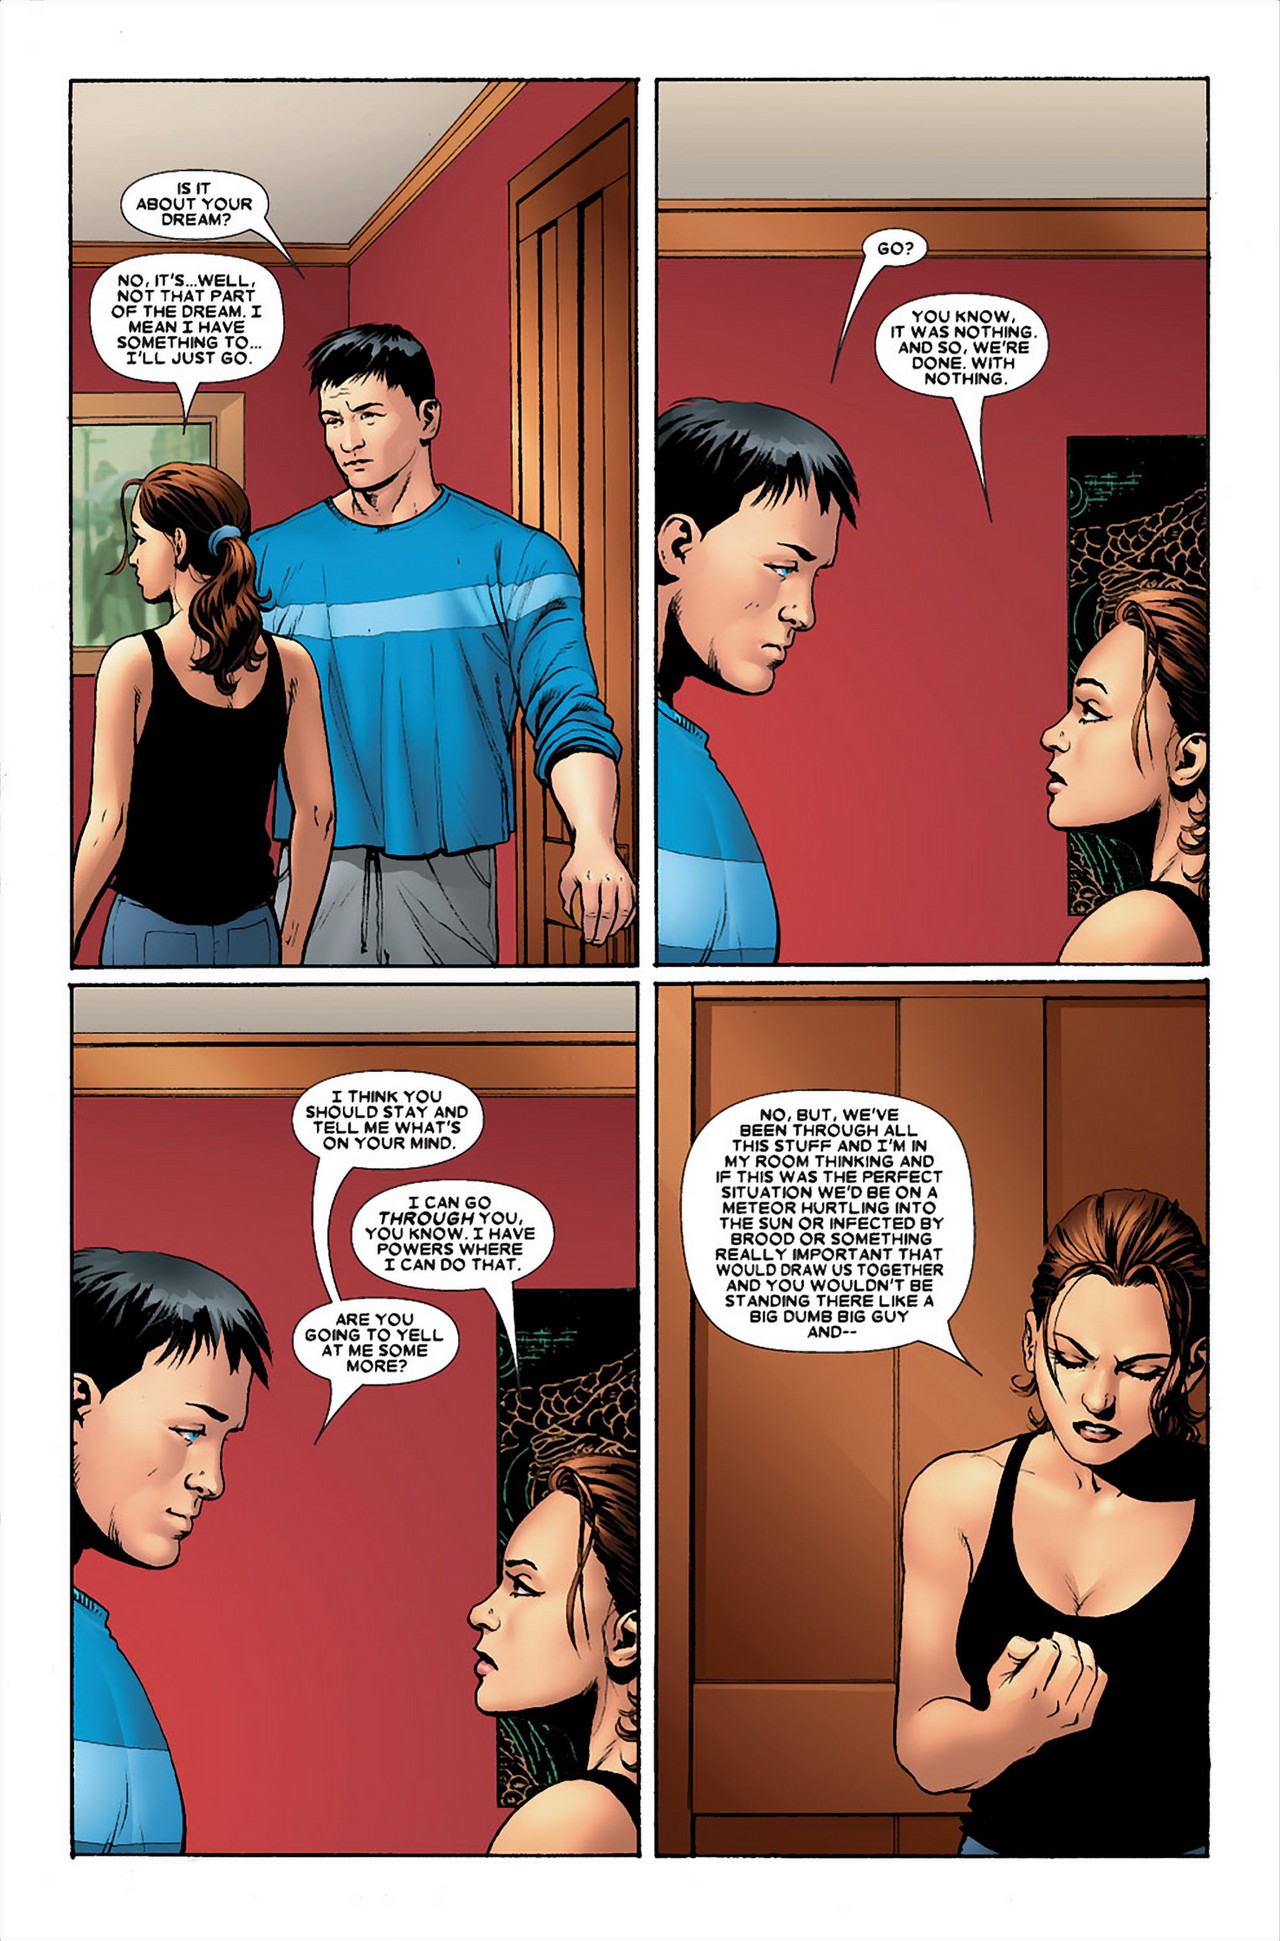 Kitty Pryde And Colossus Kiss (Astonishing X-Men)